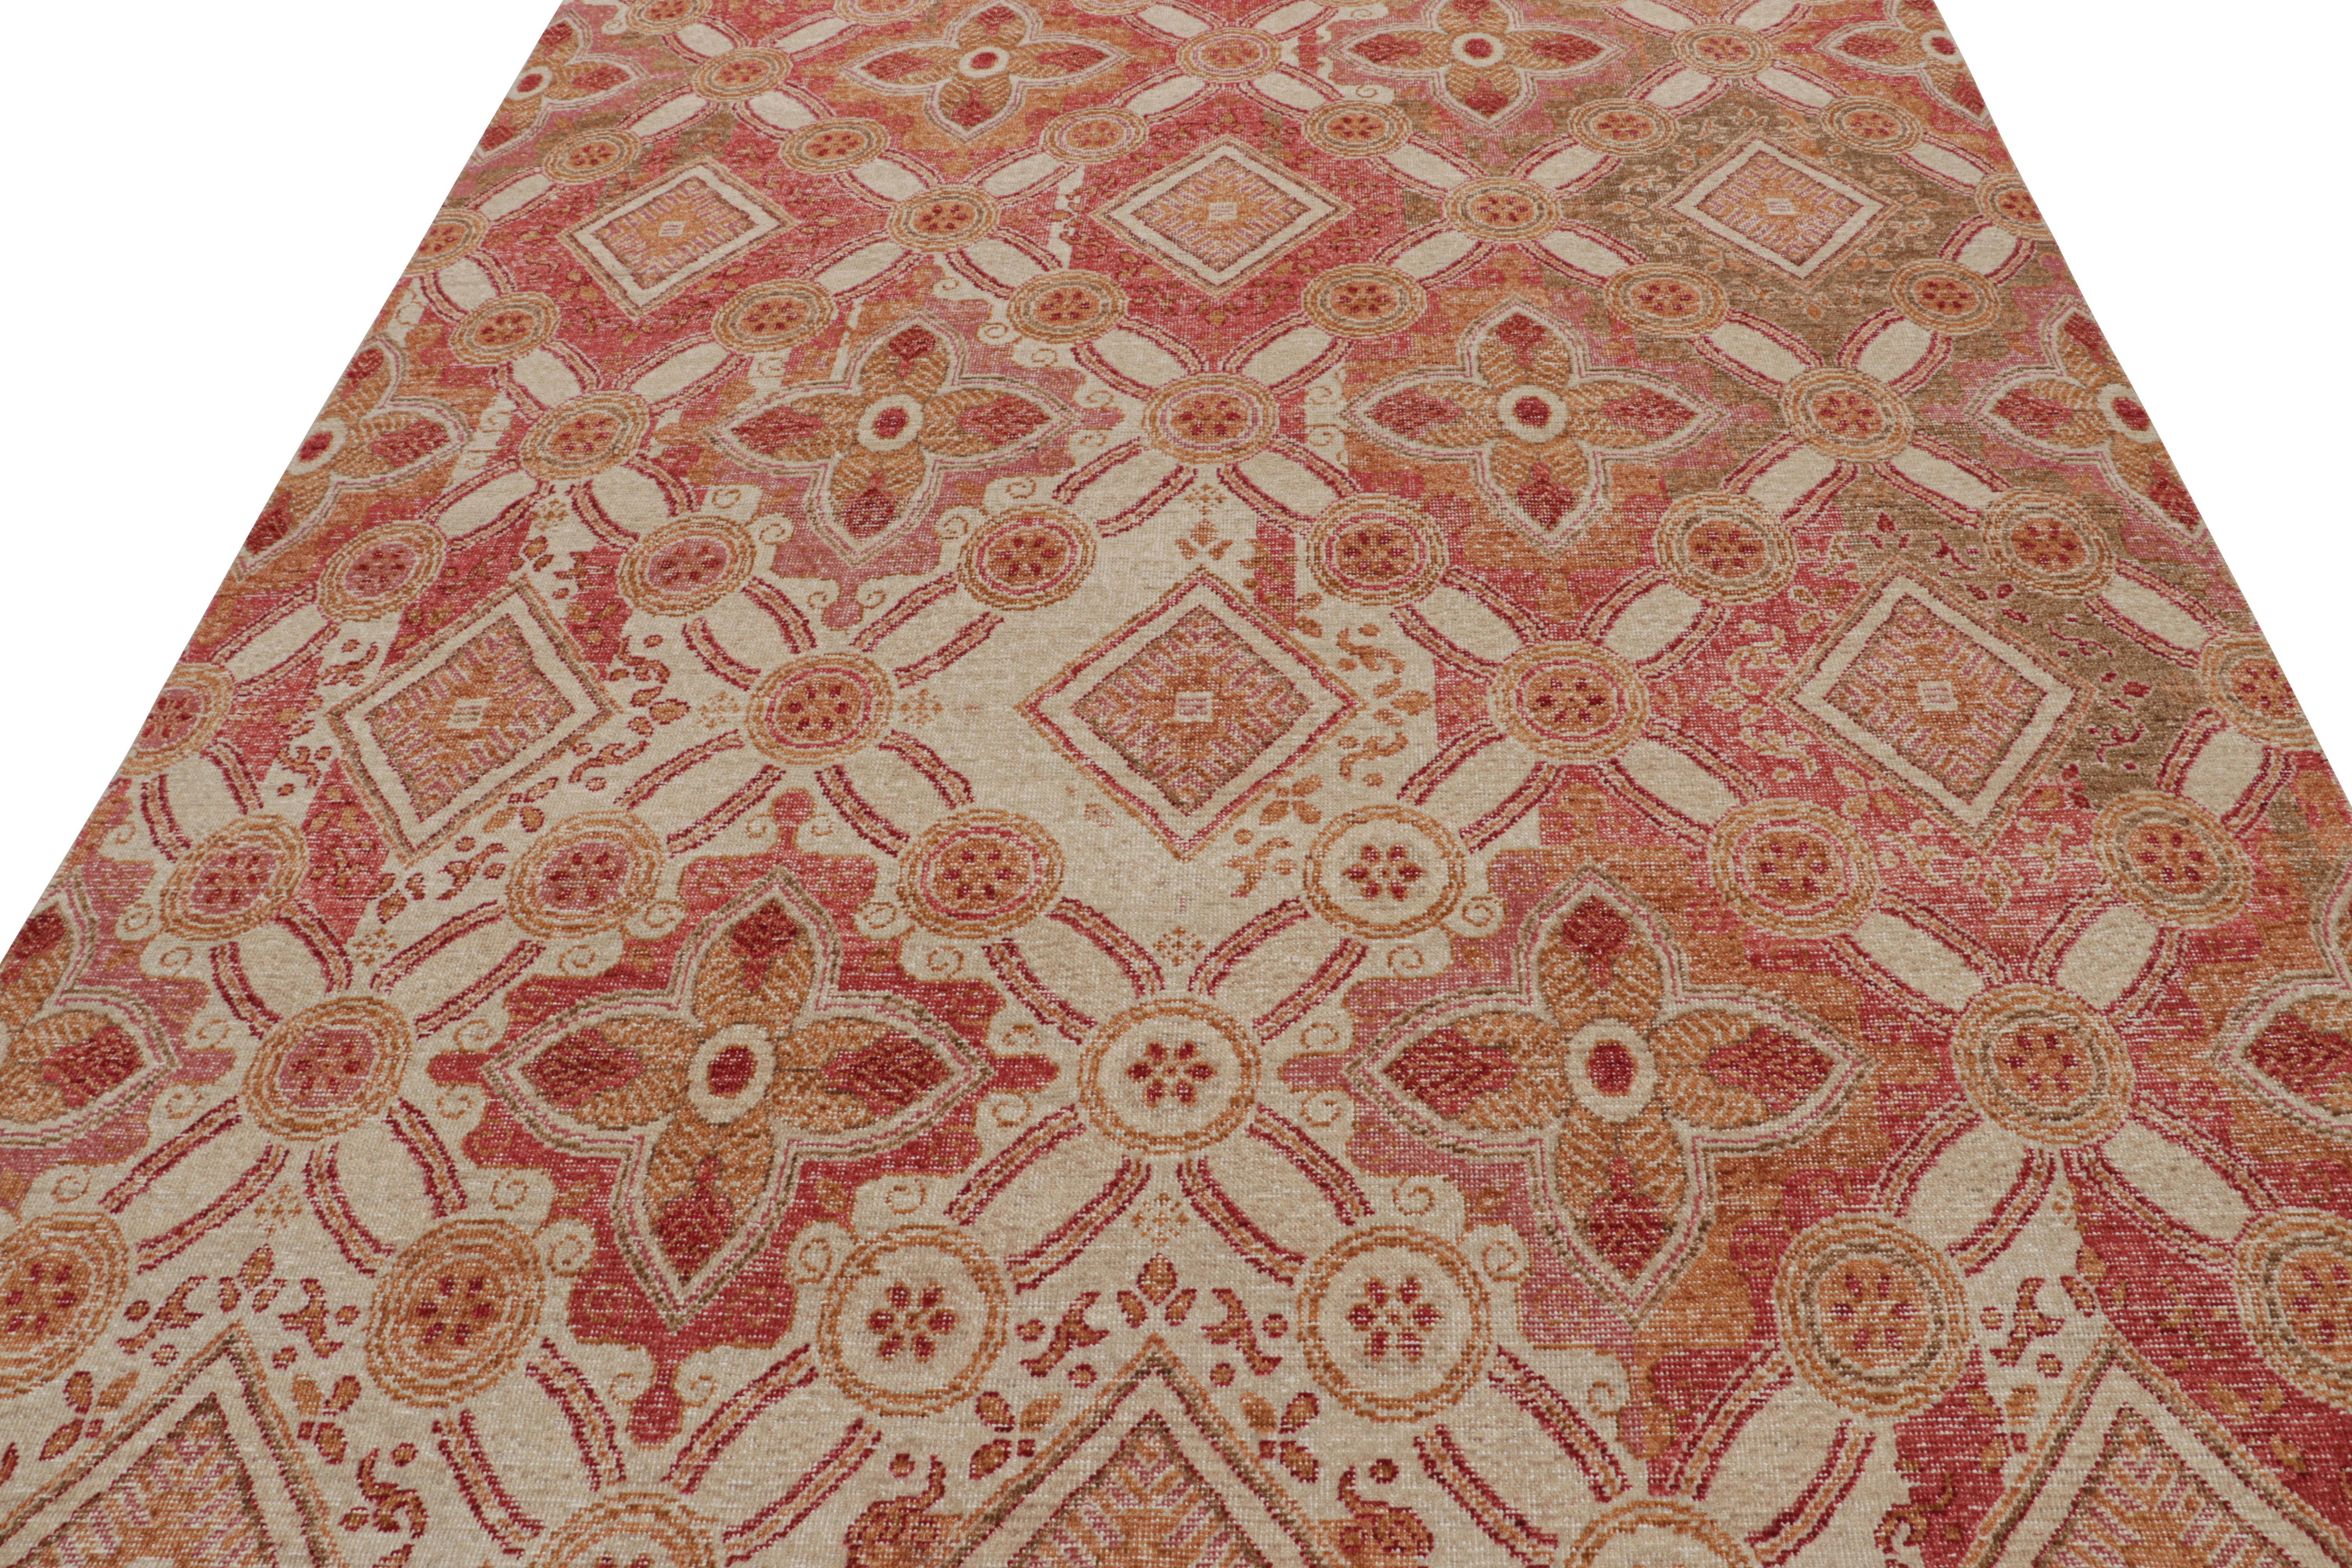 Modern Rug & Kilim’s Distressed Style Rug in Red, Beige and Gold Geometric Patterns For Sale